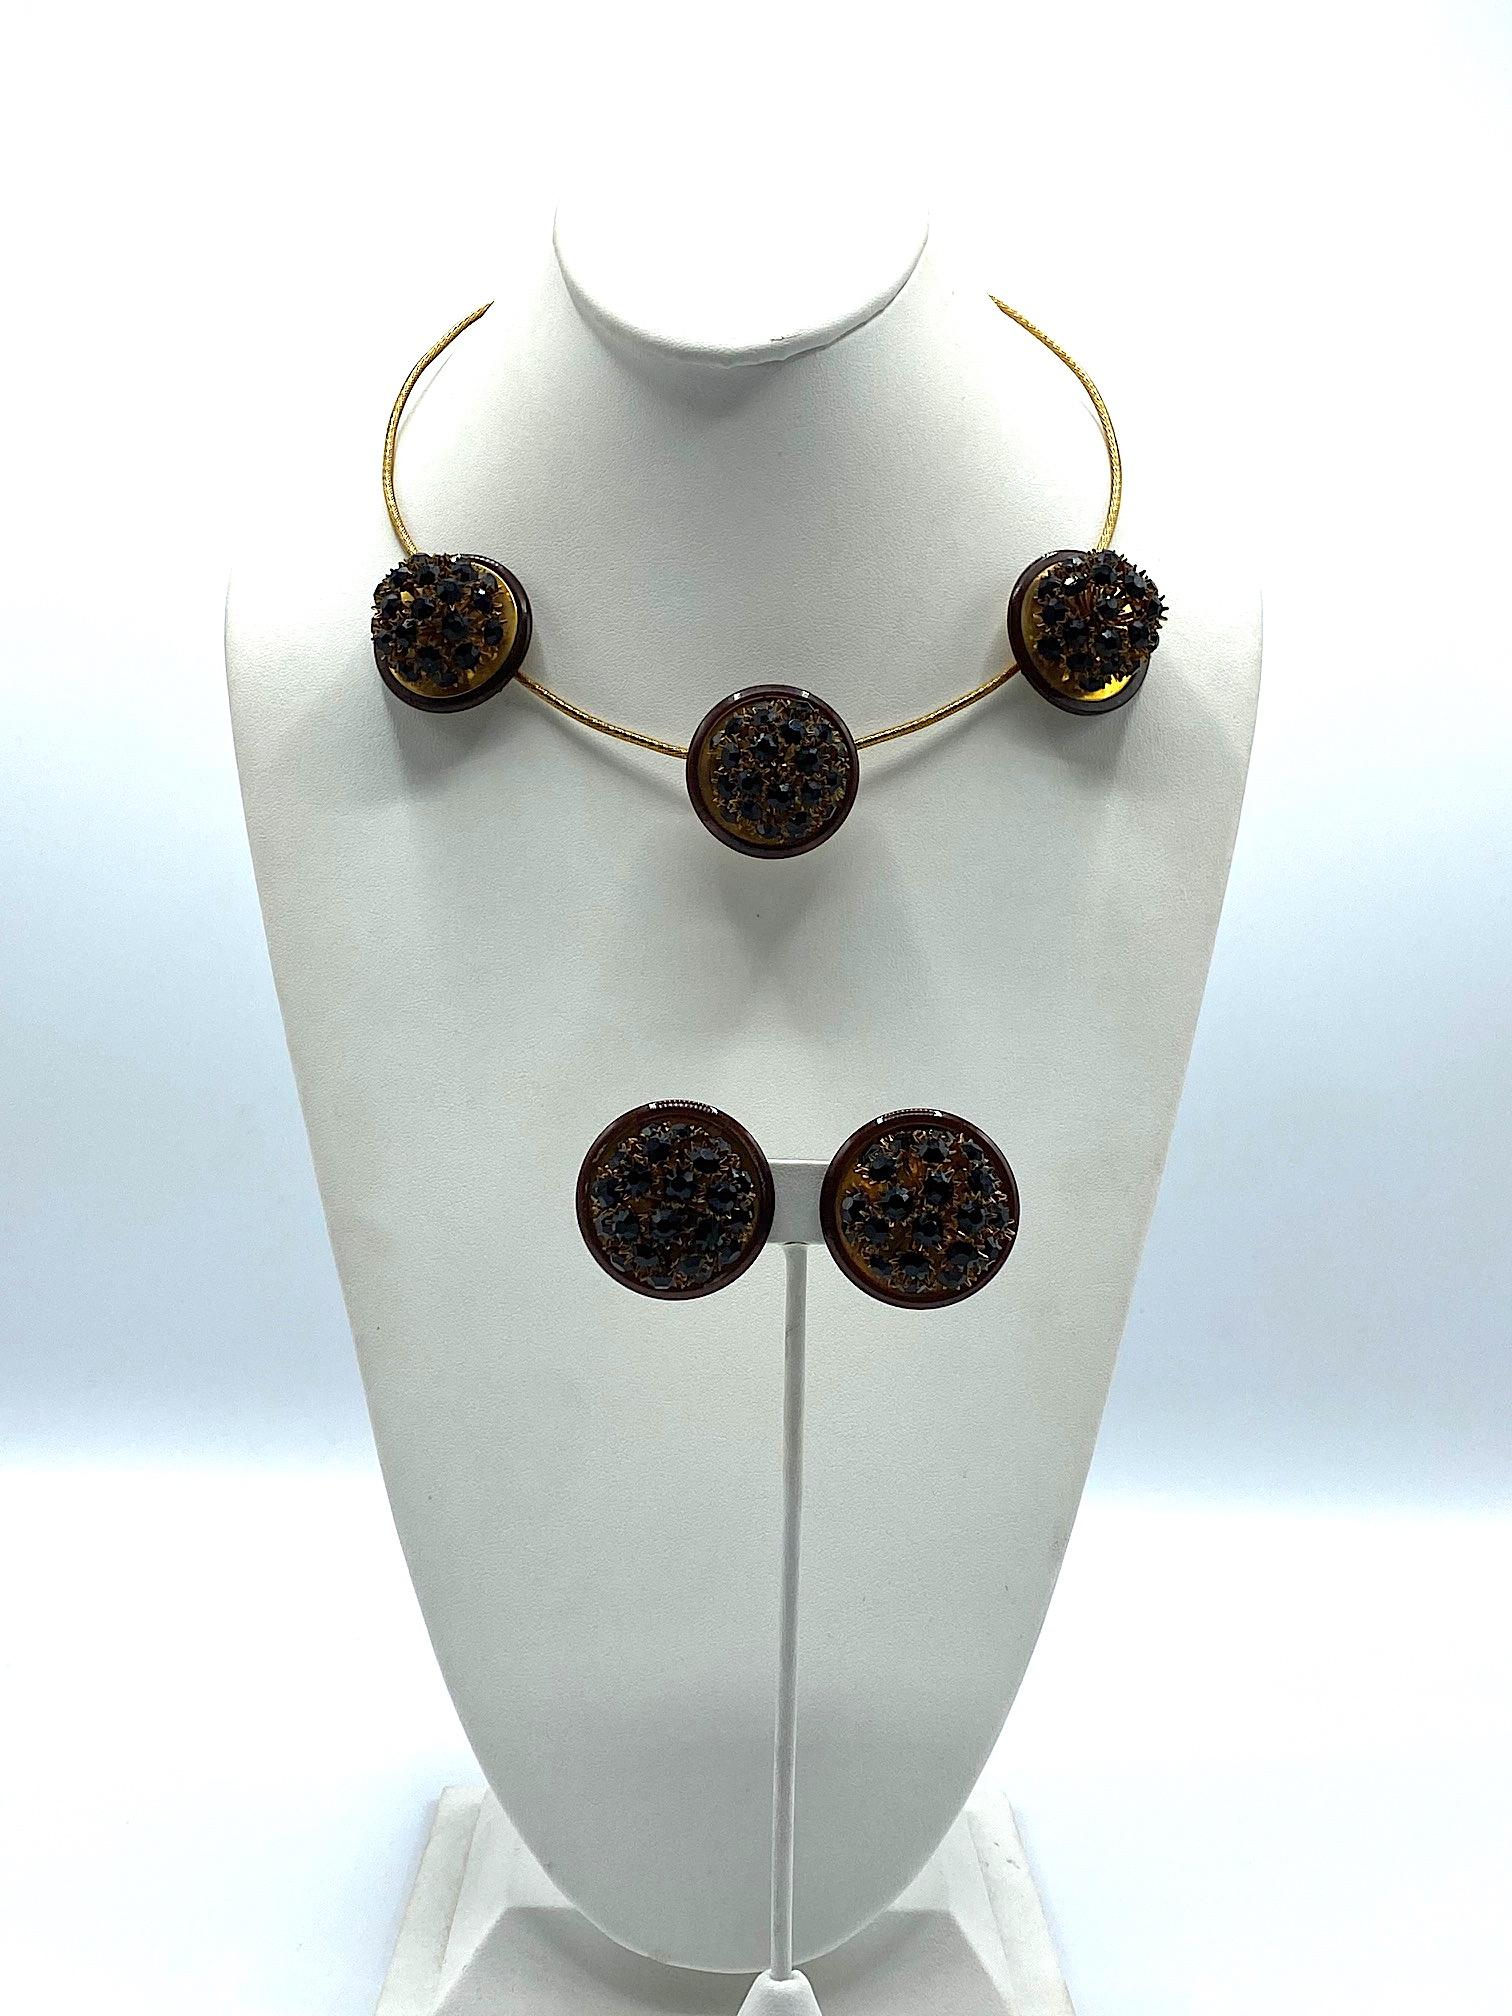 An unusual and sculptural Italian necklace and earring set from the late 1970s to early 1980s. The necklace is comprised of a textured gold wire with three decorative floral balls. Each 1.25 inch diameter disk is comprised of a round gold back piece